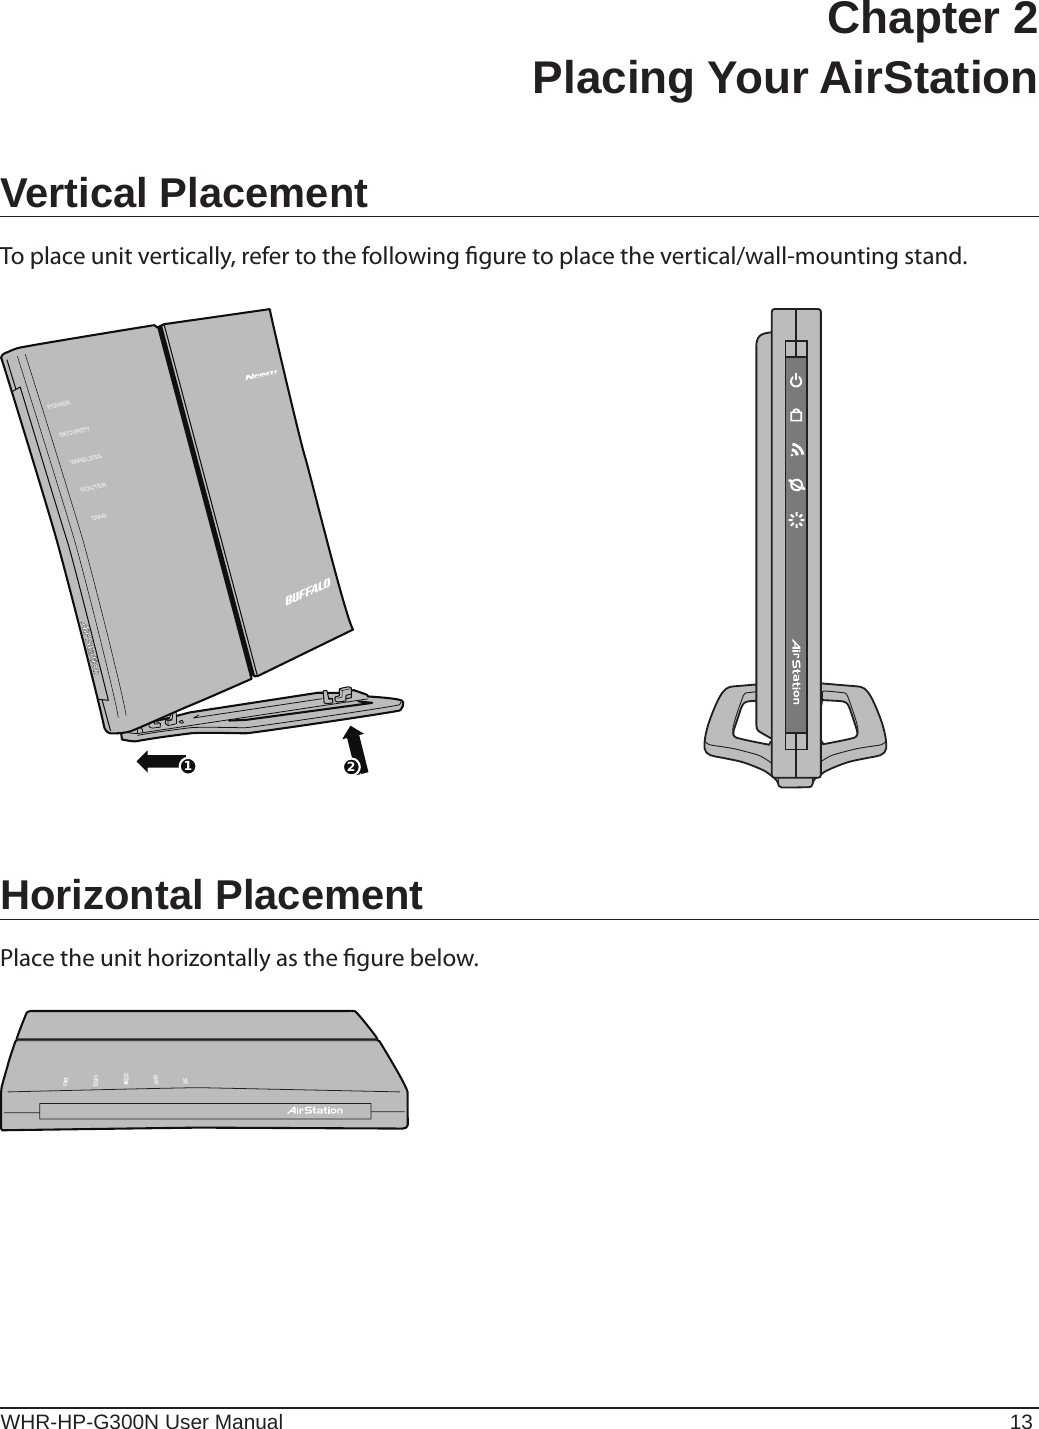 112WHR-HP-G300N User Manual 13Chapter 2  Placing Your AirStationVertical PlacementTo place unit vertically, refer to the following gure to place the vertical/wall-mounting stand.Horizontal PlacementPlace the unit horizontally as the gure below.